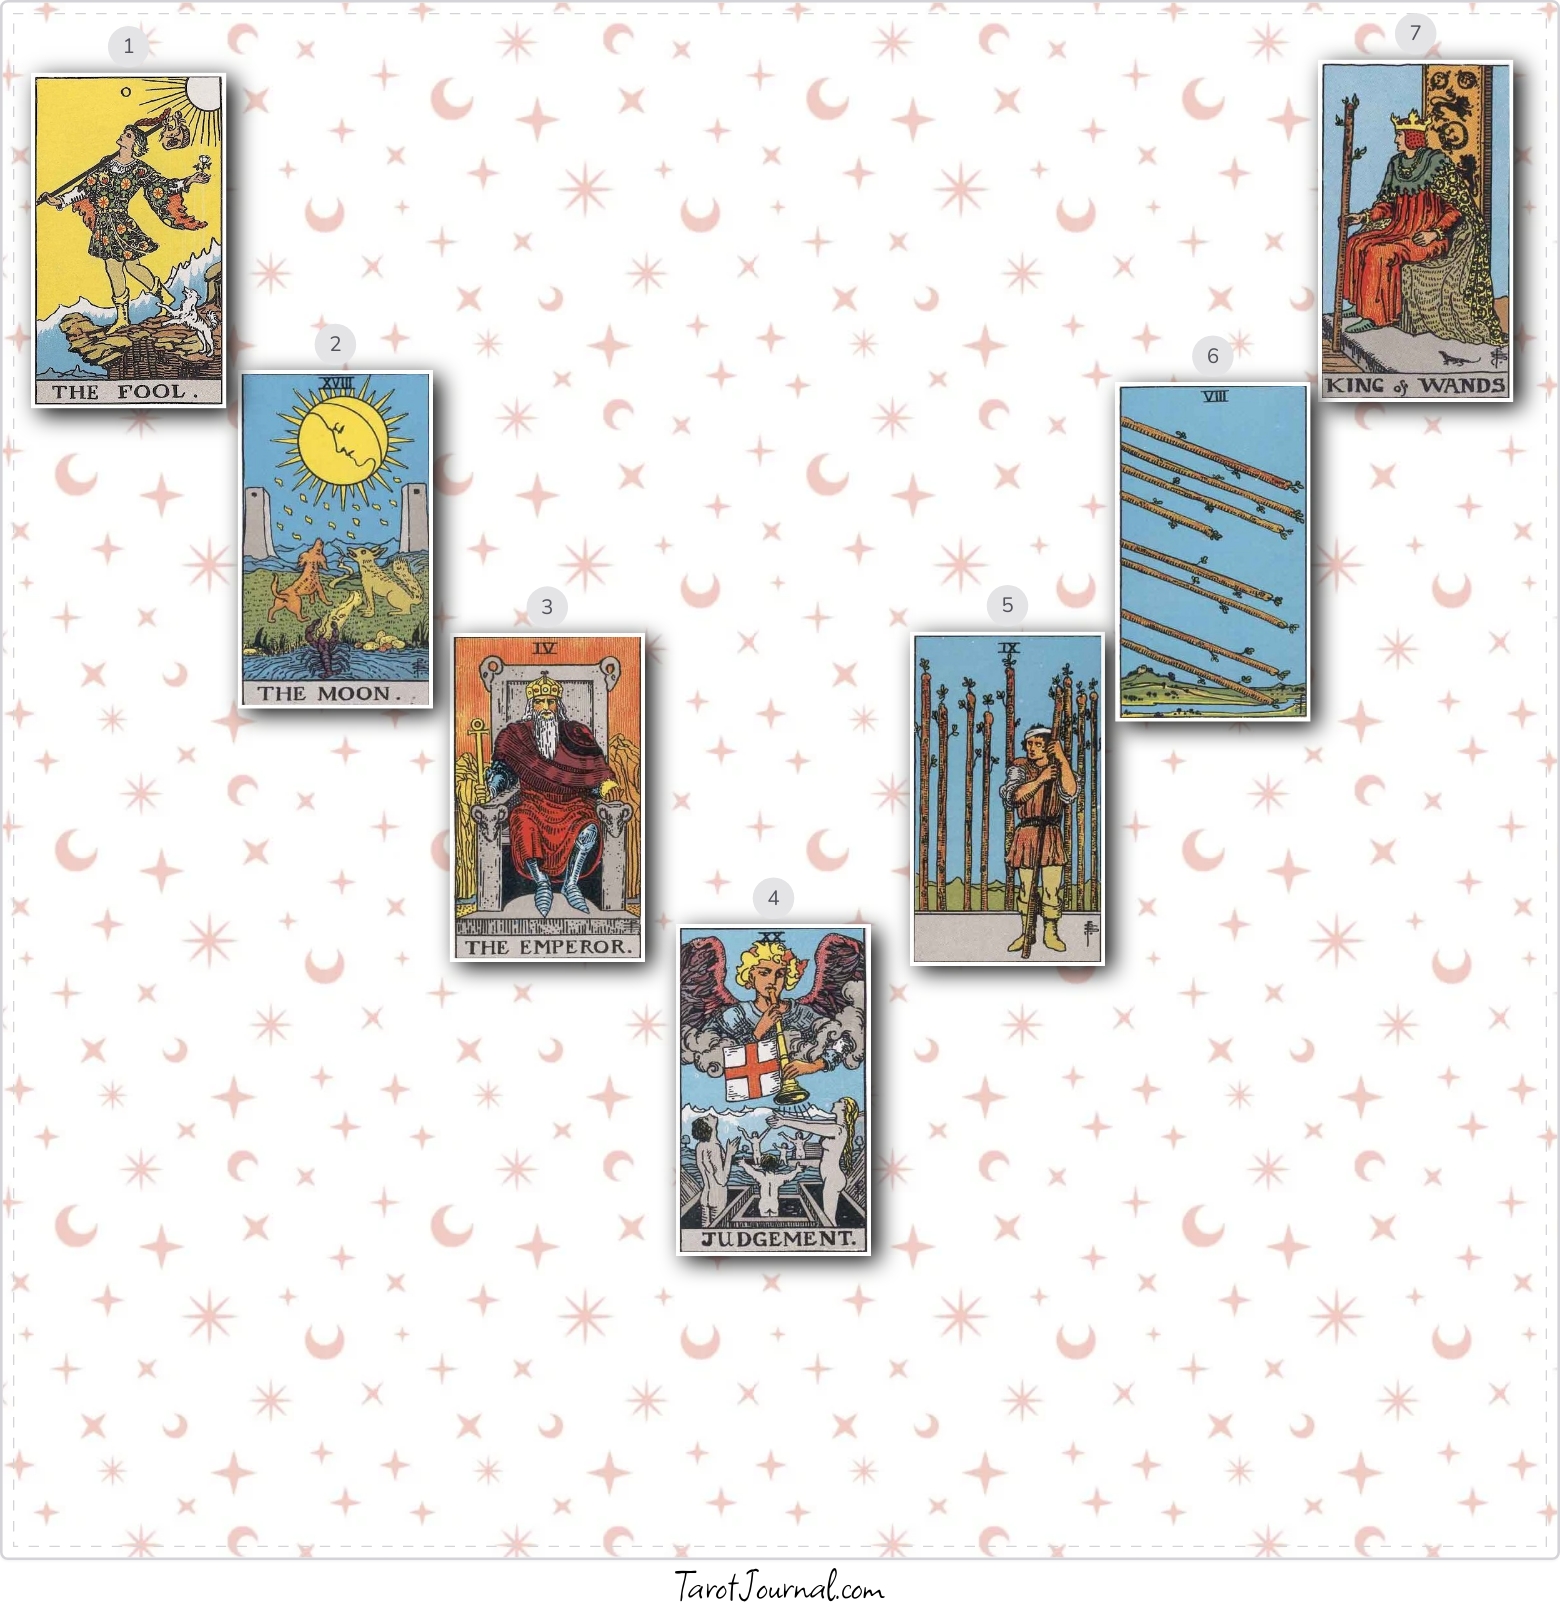 November 26th Reading - What's going on? Any advice? - tarot reading by moonlight